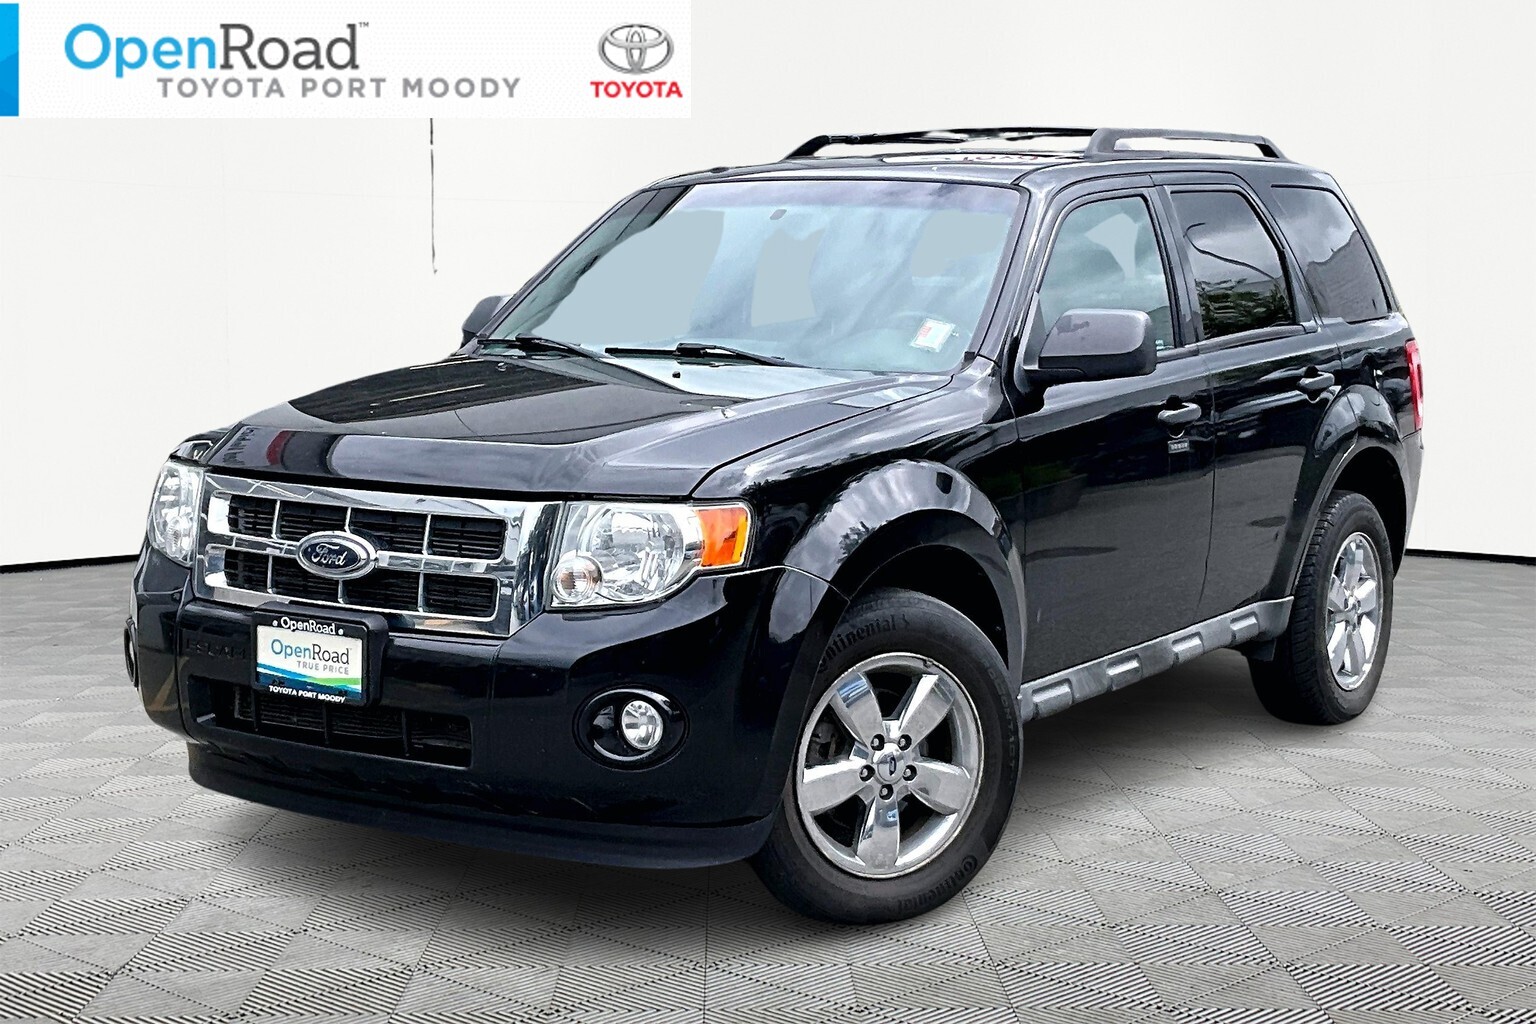 2009 Ford Escape XLT 4D Utility 4WD |OpenRoad True Price |Local |Se